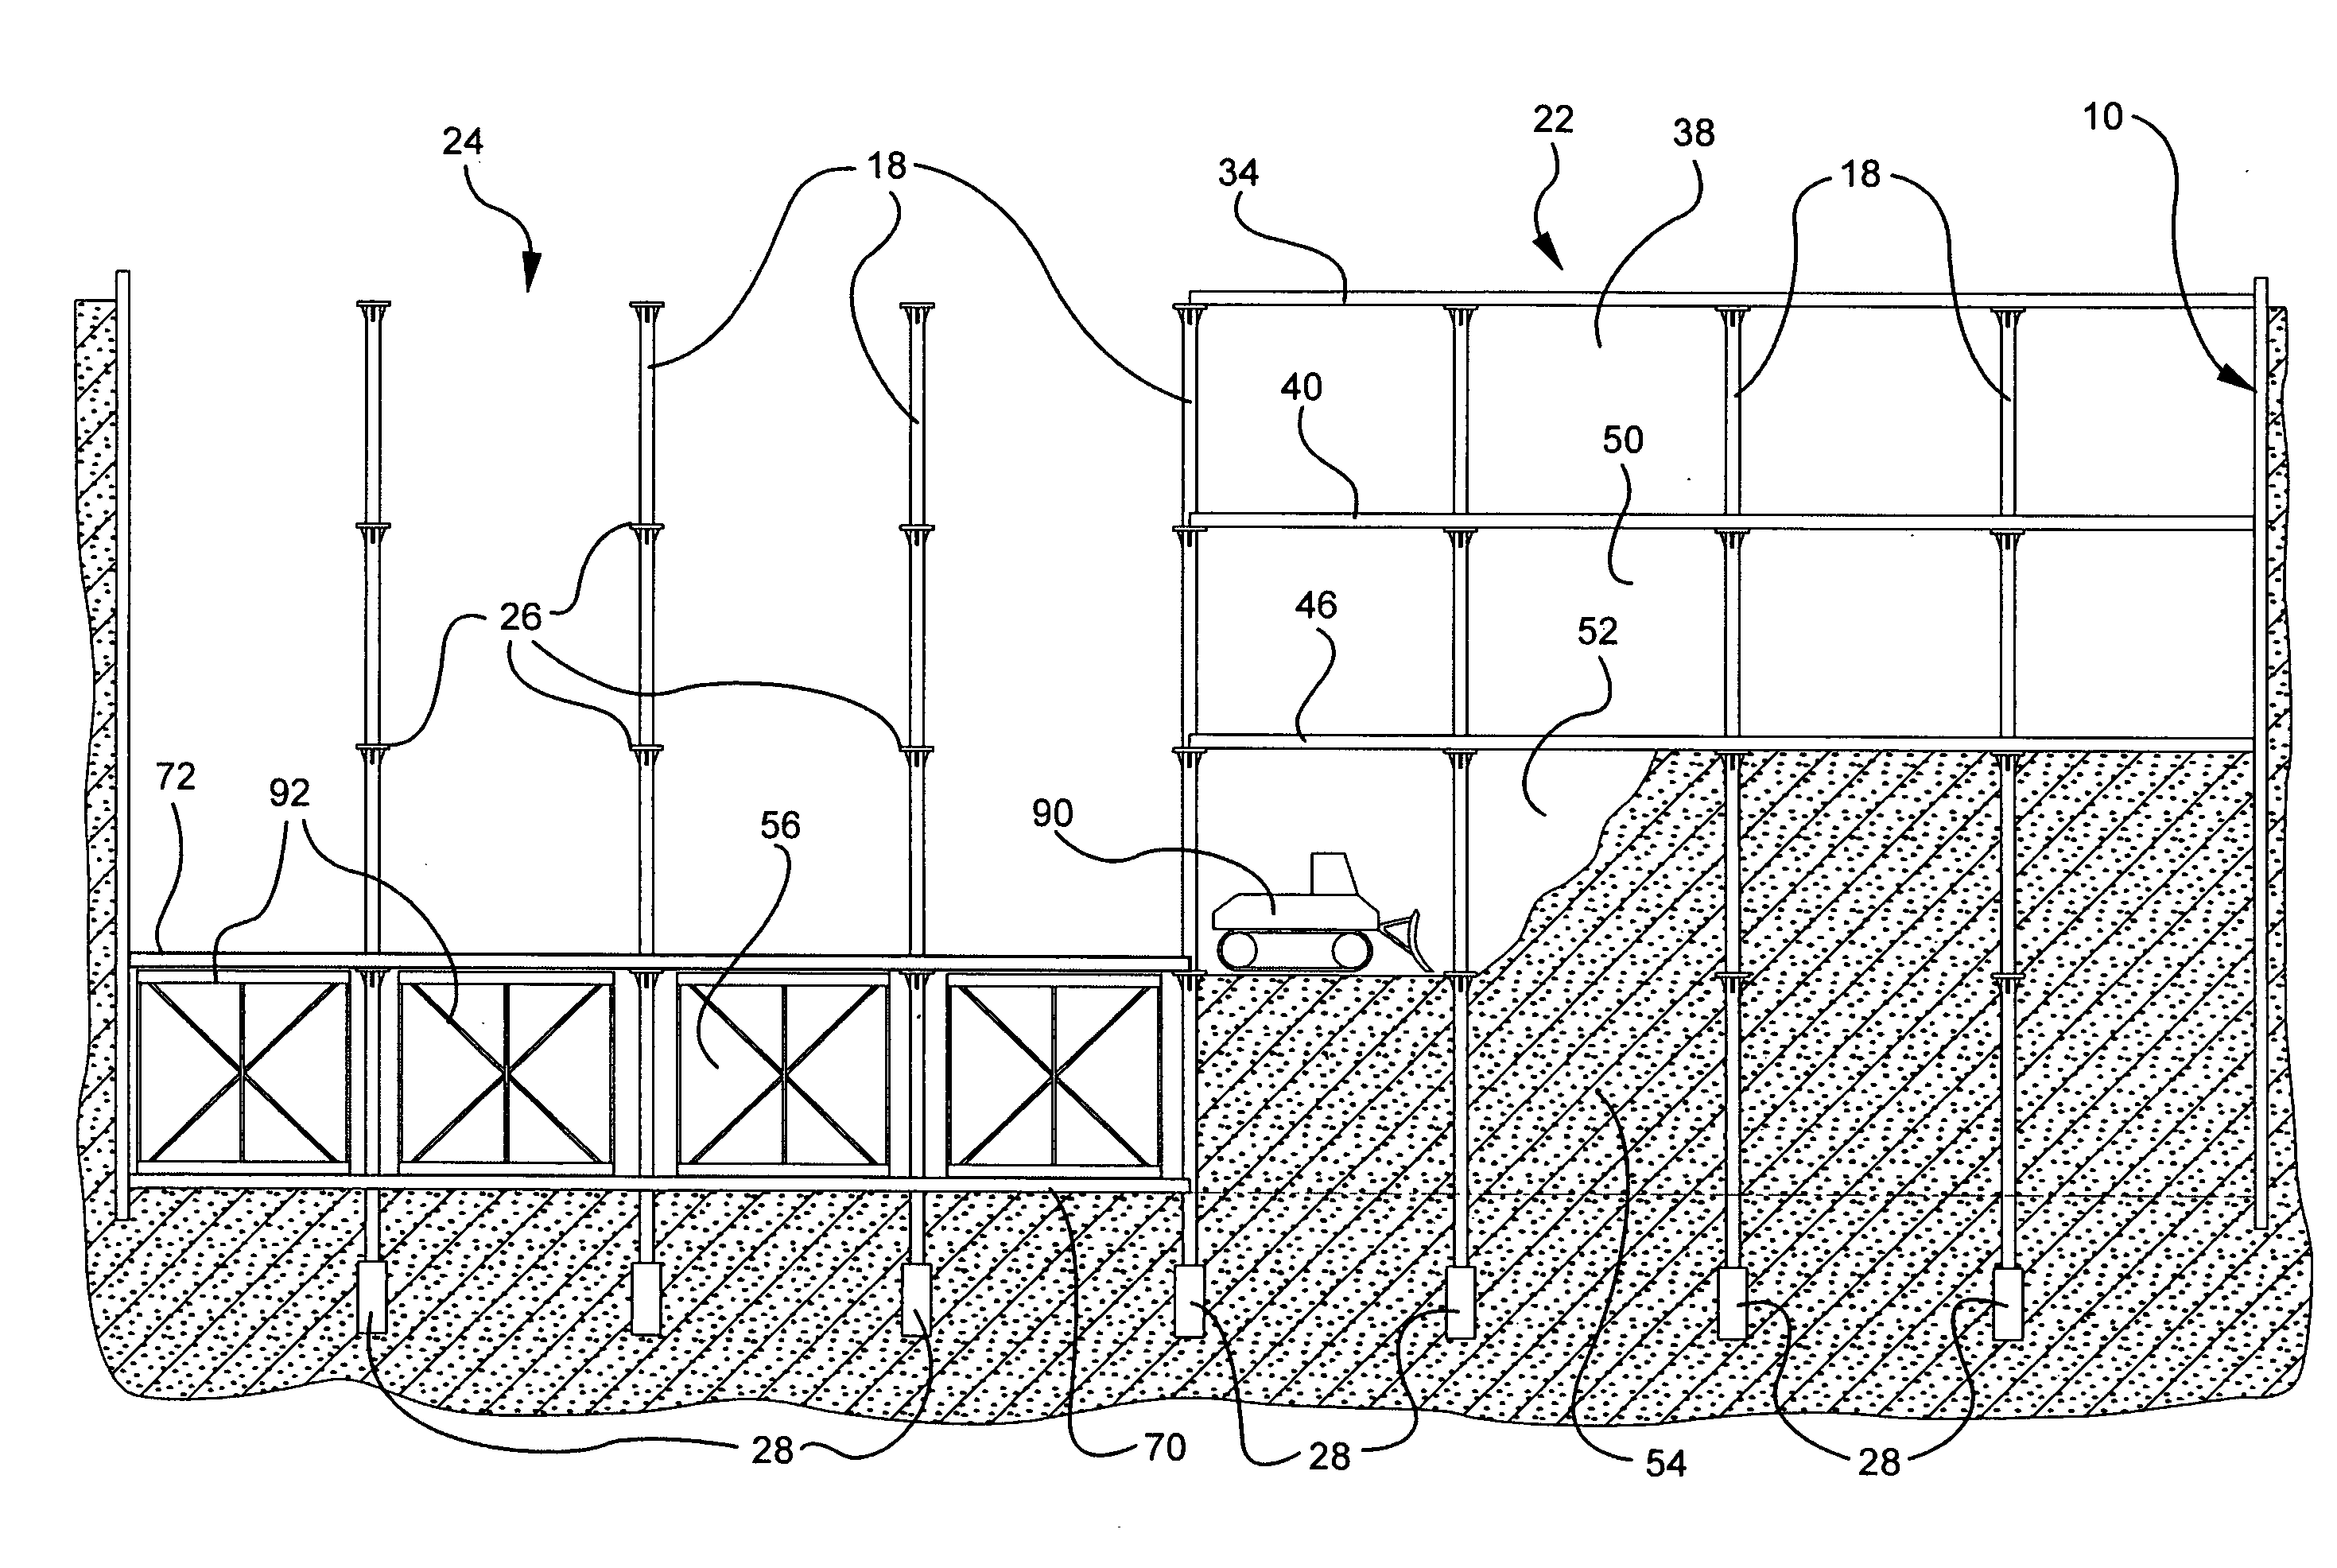 Method of construction using sheet piling sections